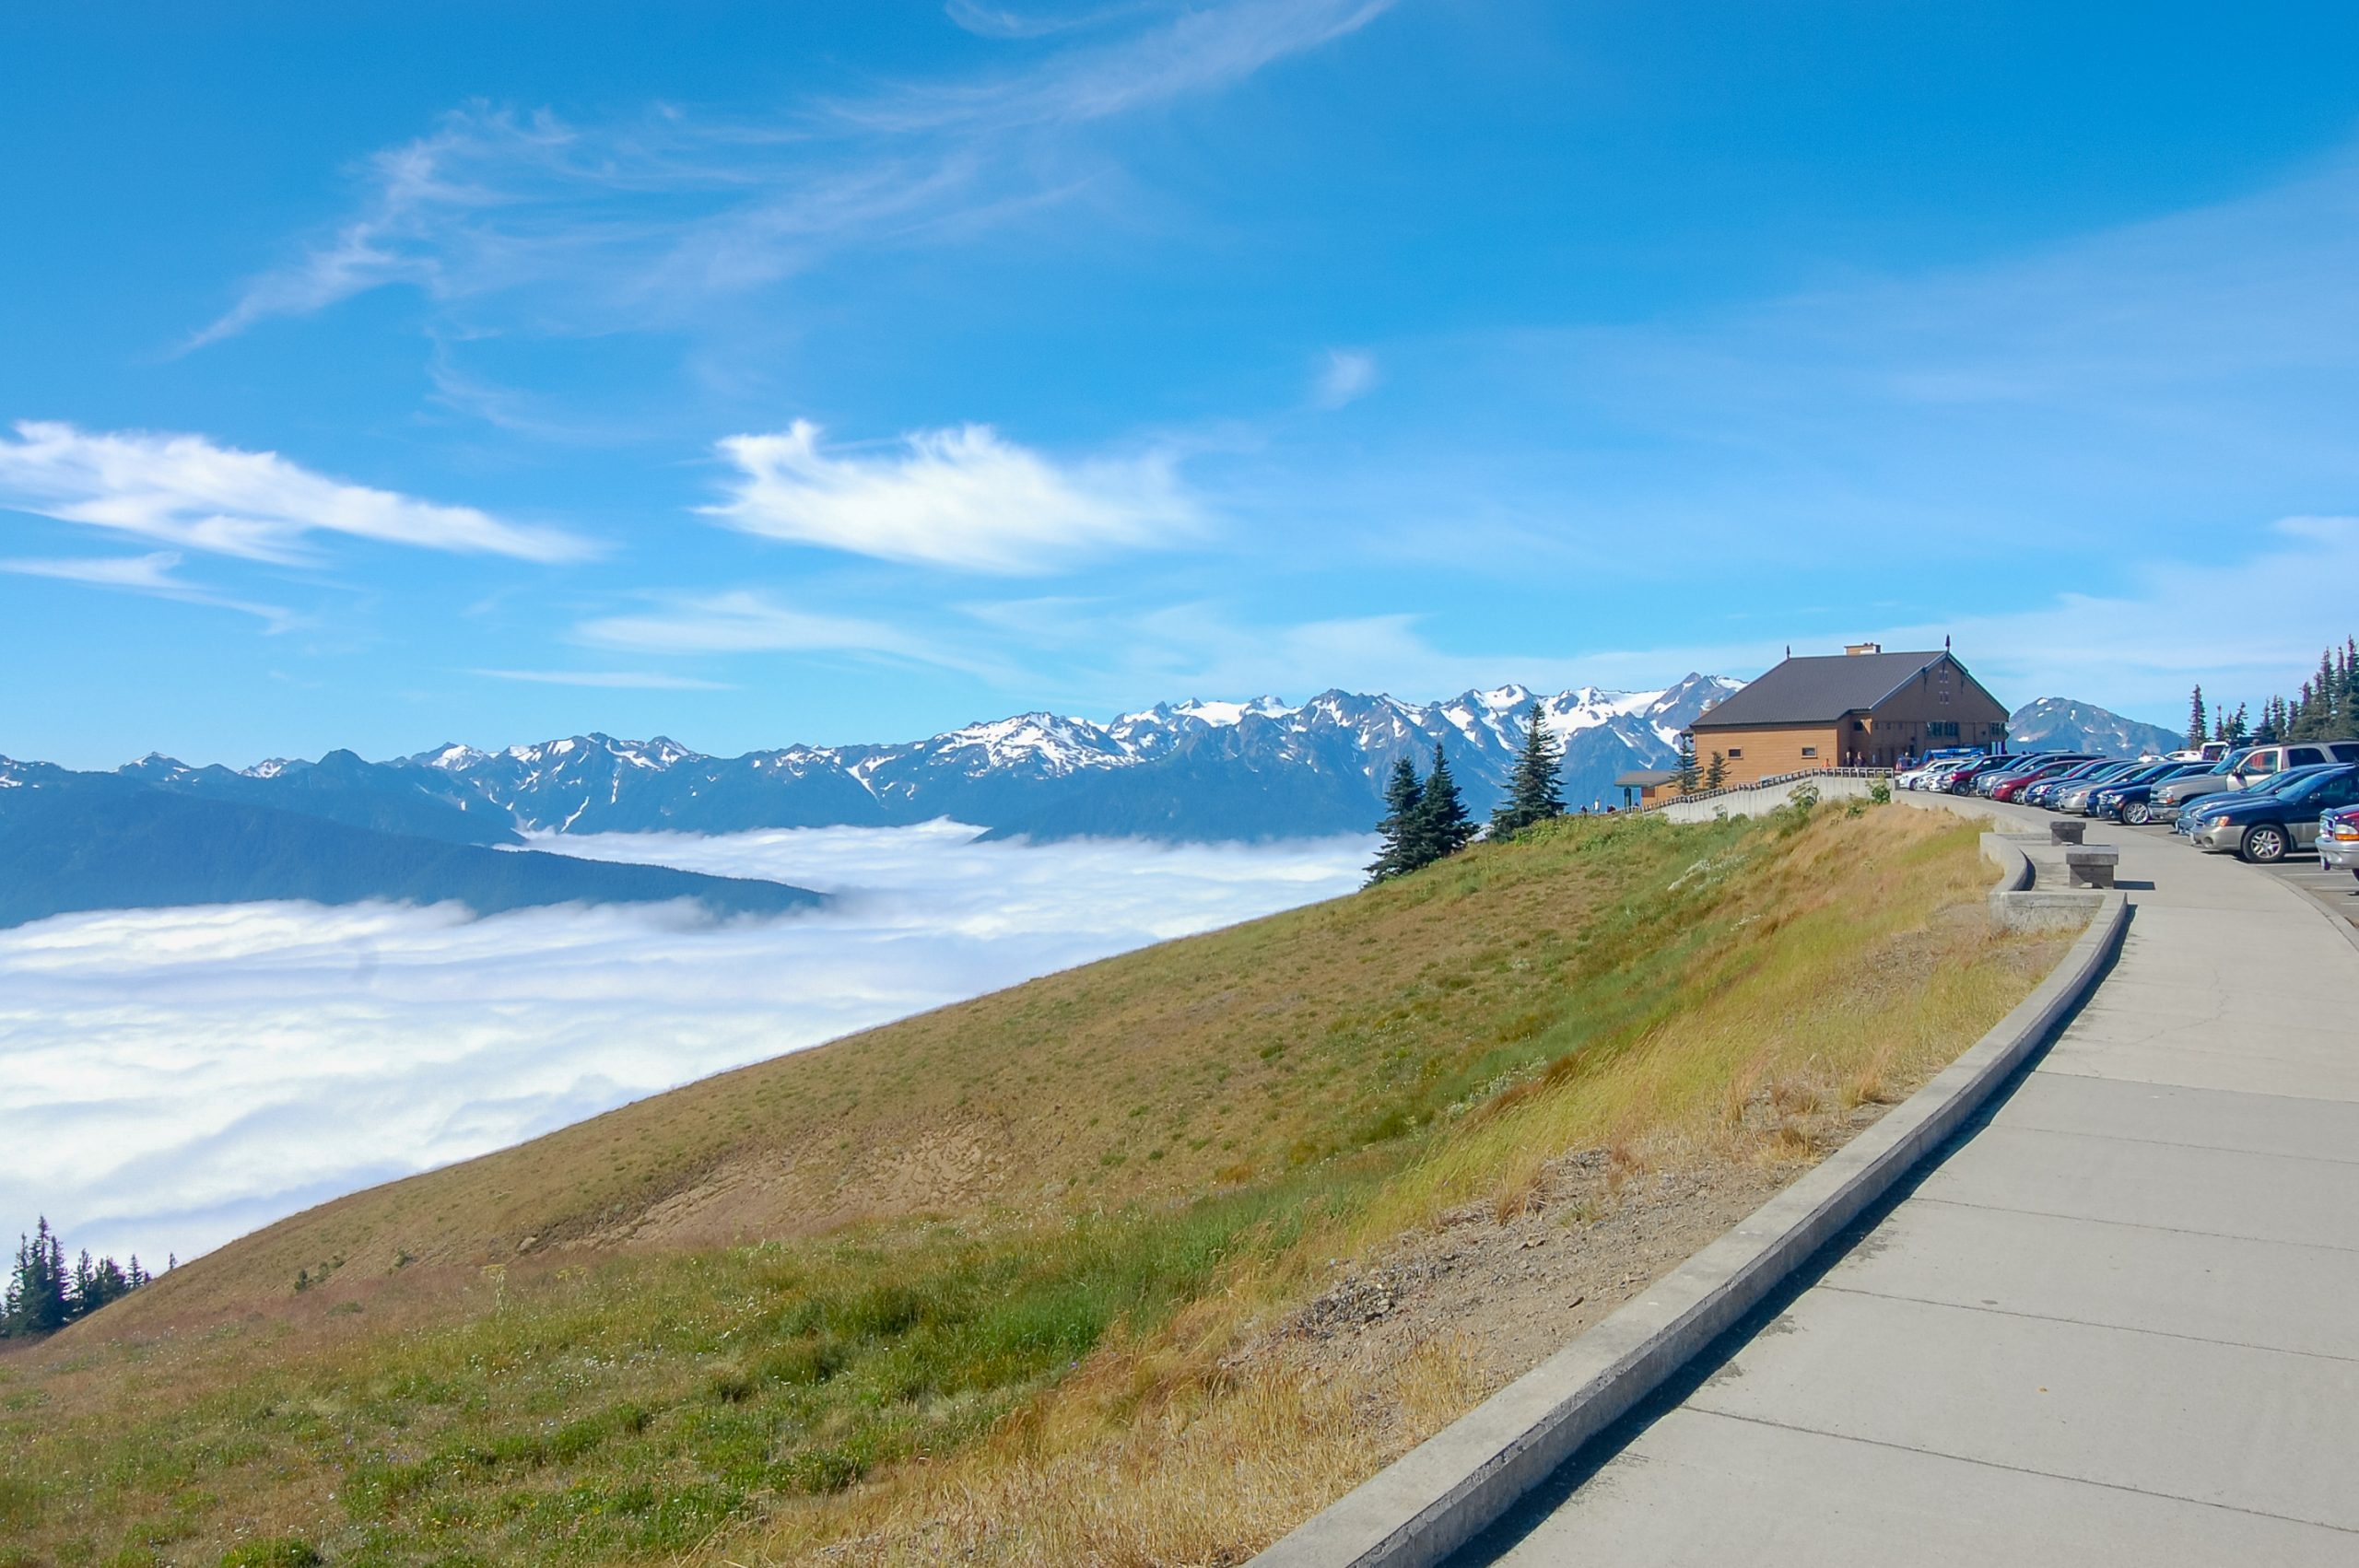 The spectacular Hurricane Ridge is only an hour drive from Discovery Bay.